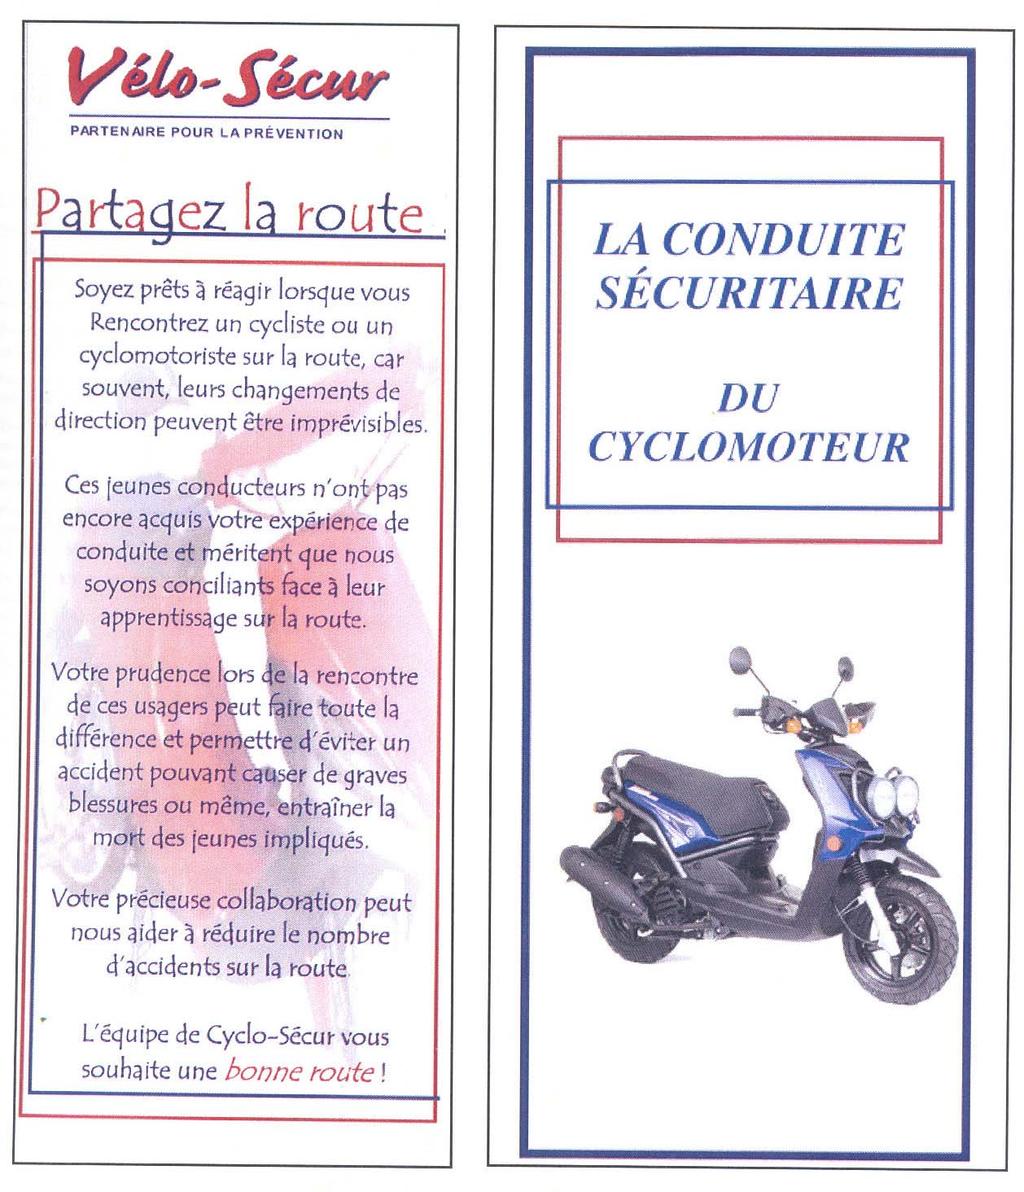 Examples of pamphlets distributed